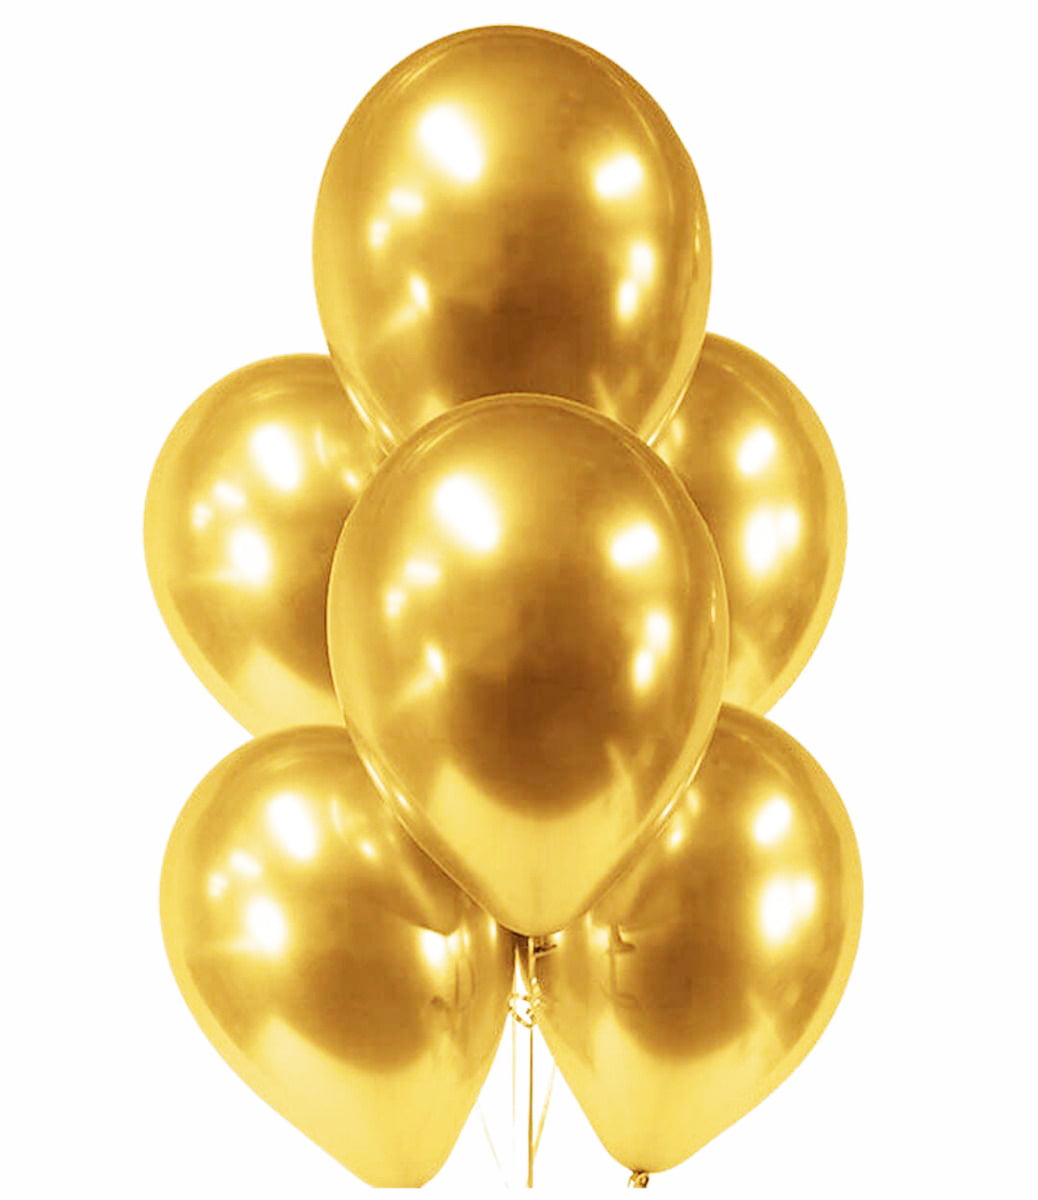 The Magic Balloons Store-Solid Chrome Balloons (9 Inch, Gold, 30 Piece) Balloon